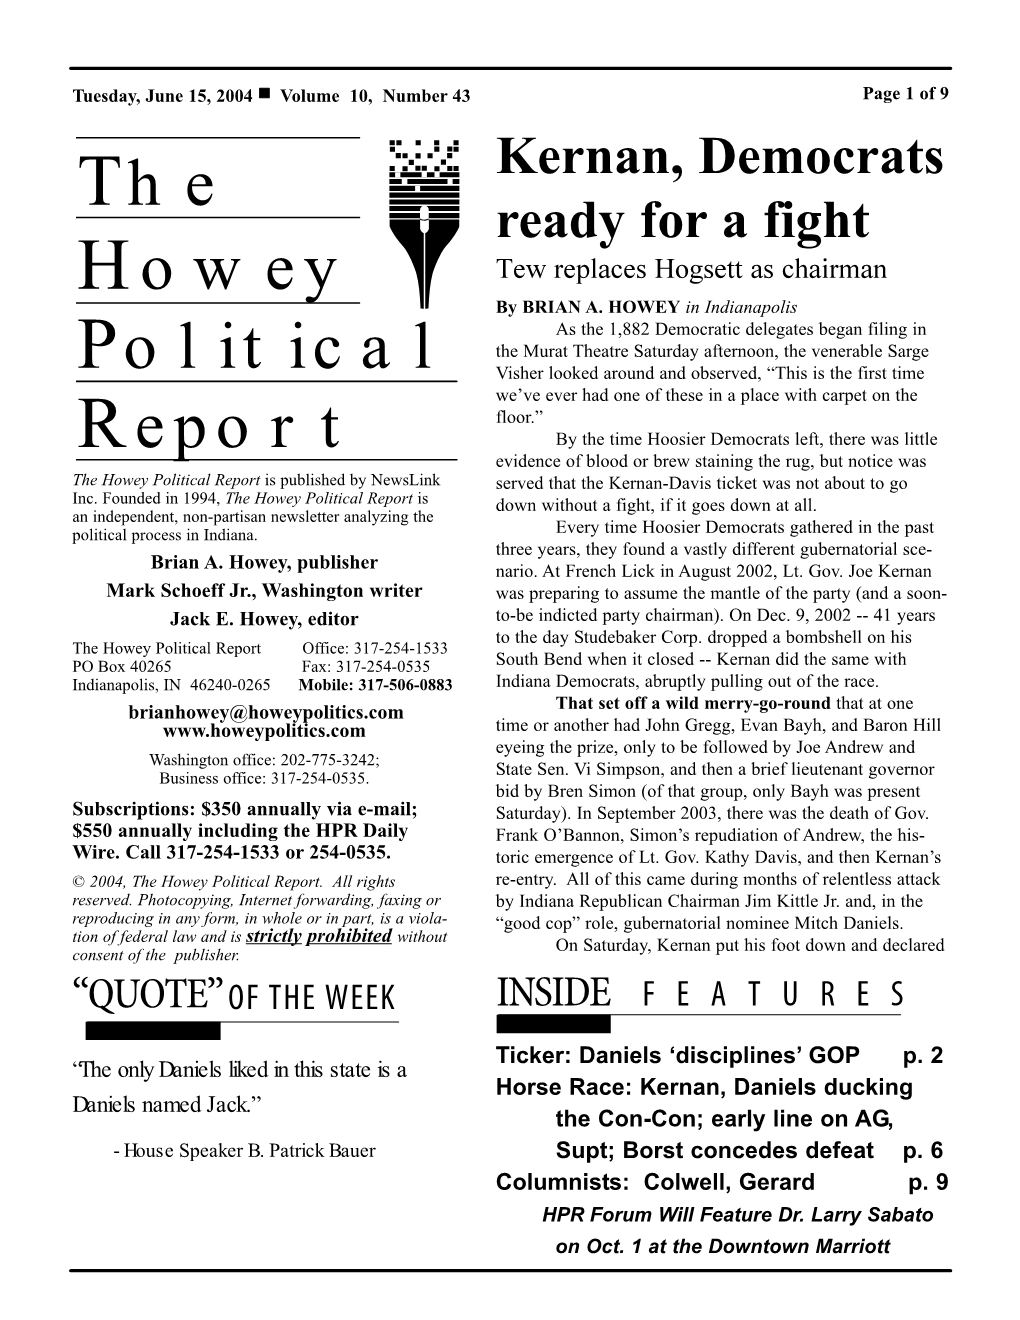 The Howey Political Report Is Published by Newslink Served That the Kernan-Davis Ticket Was Not About to Go Inc